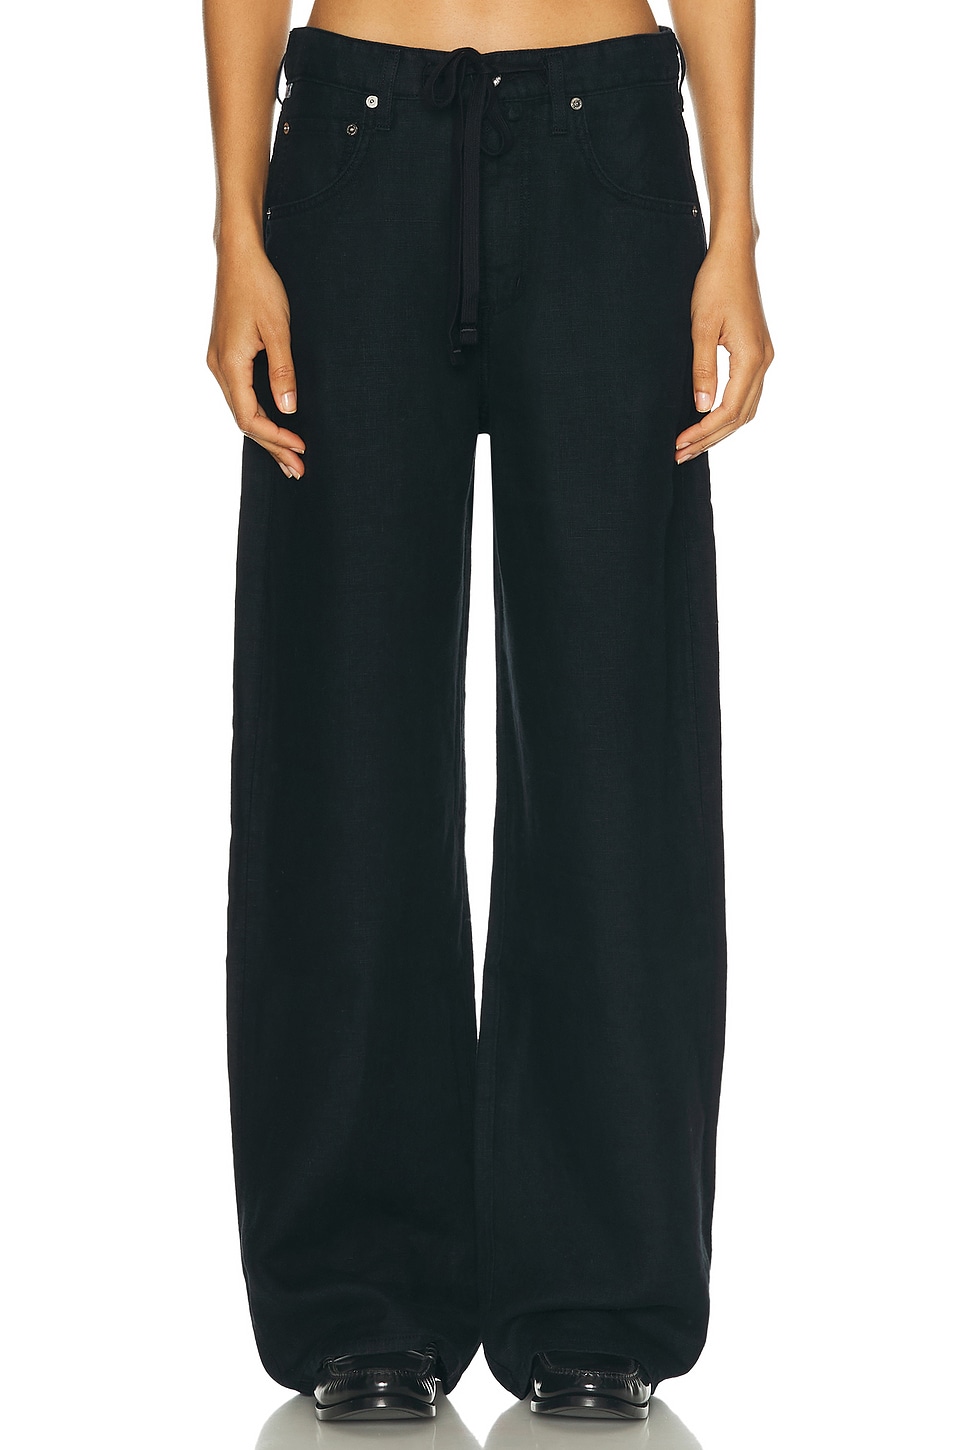 Image 1 of Citizens of Humanity Brynn Drawstring Trouser in Black